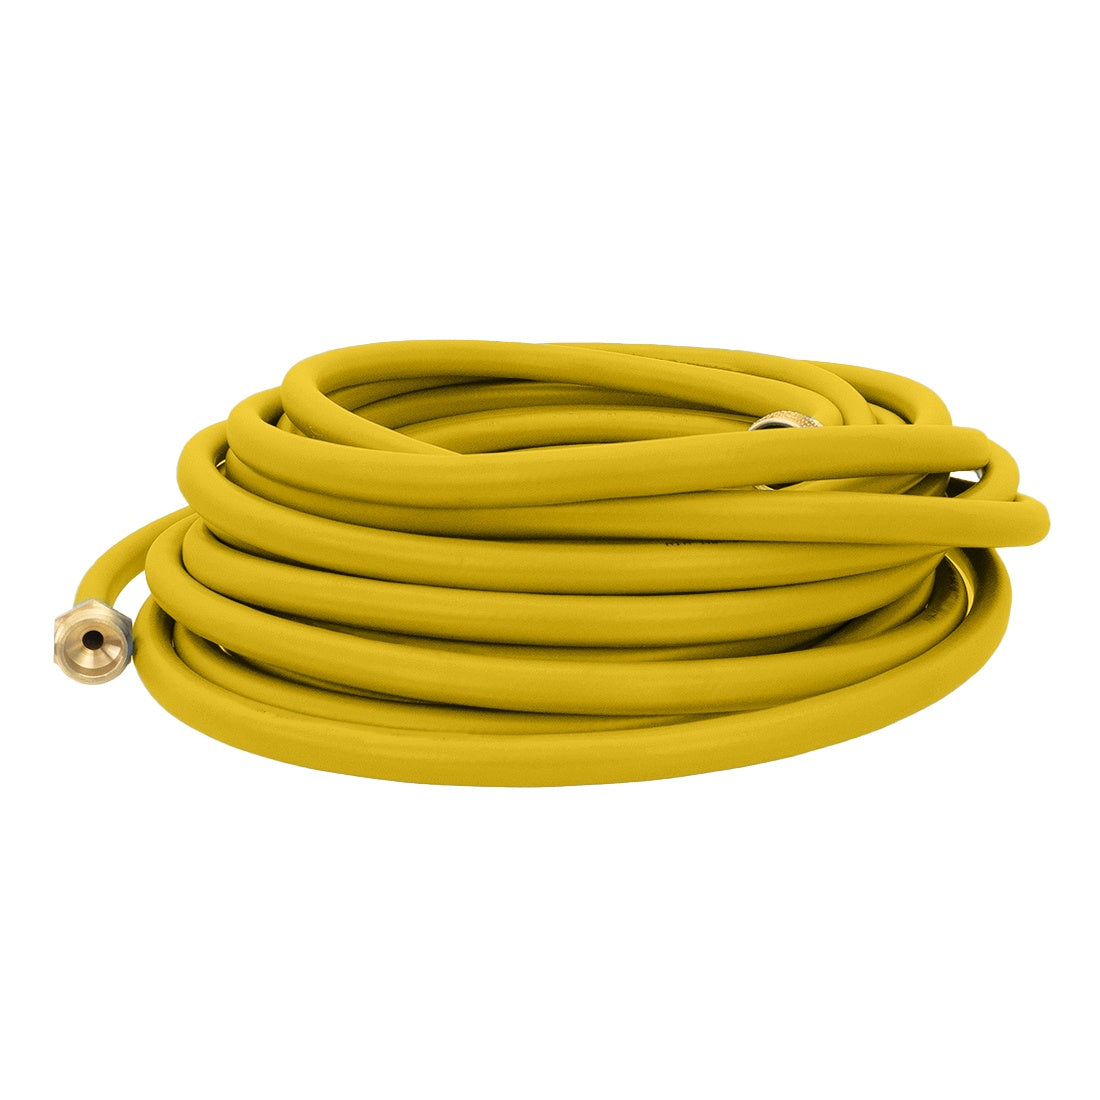 XERO Rubber Hose - 3/8 Inch Yellow Left Side View